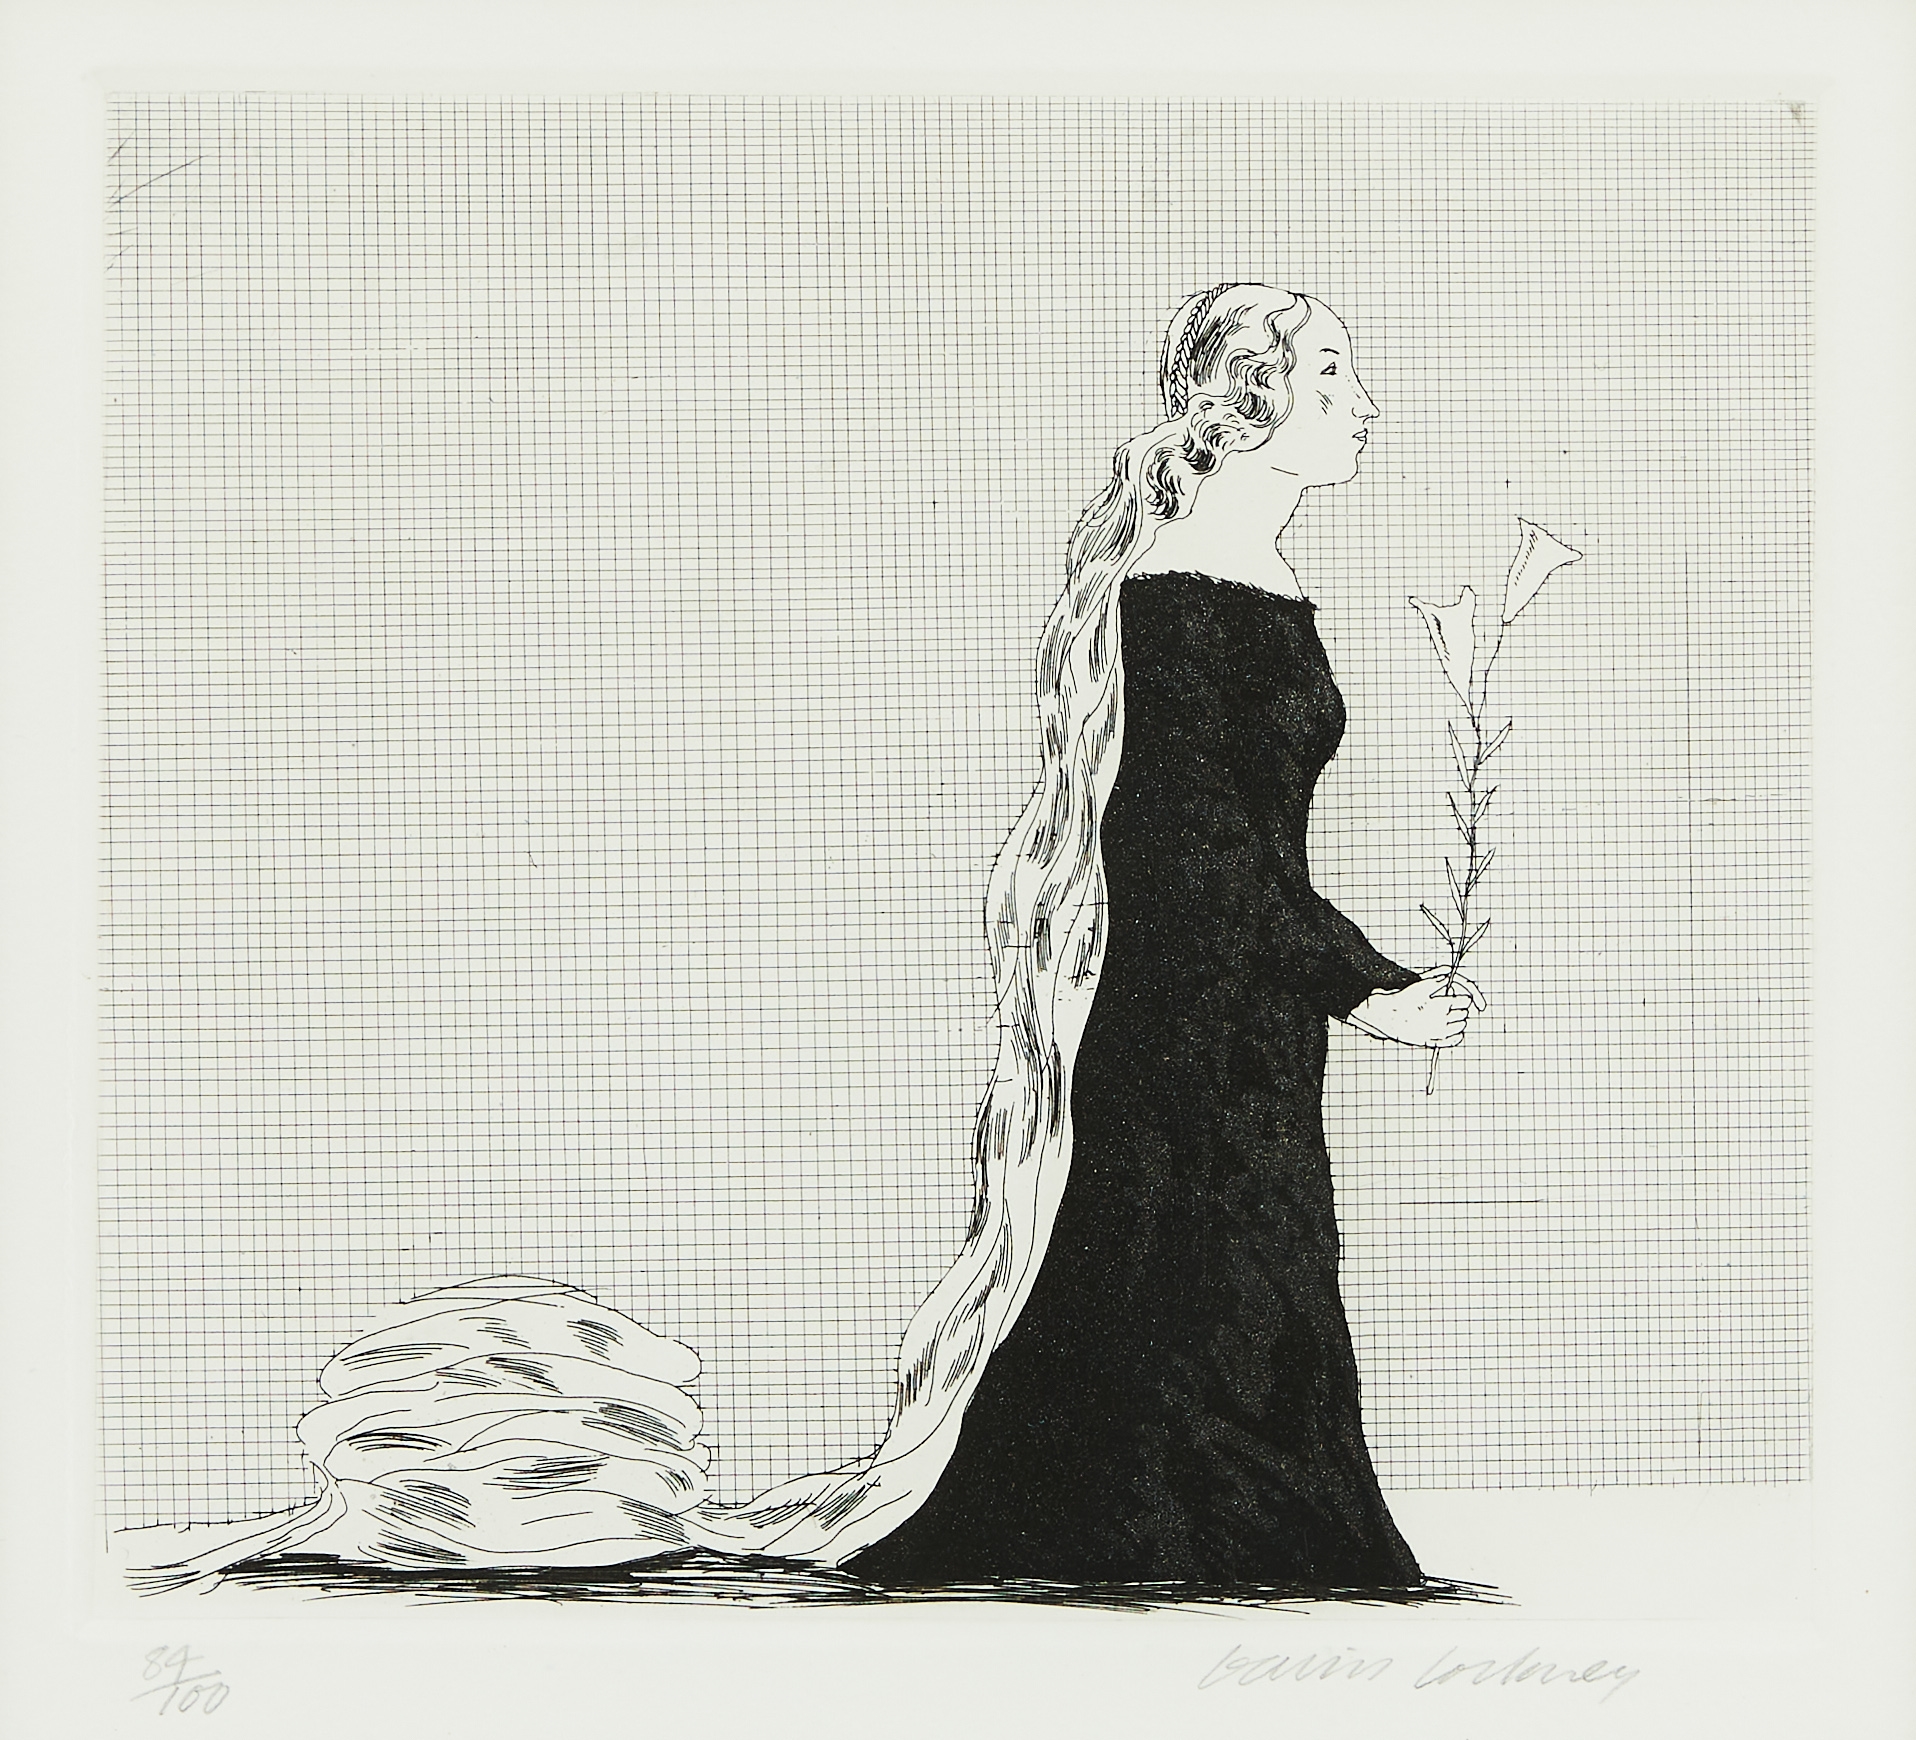 ”The Older Rapunzel” from ”Six Fairy Tales from the Brothers Grimm” - David Hockney